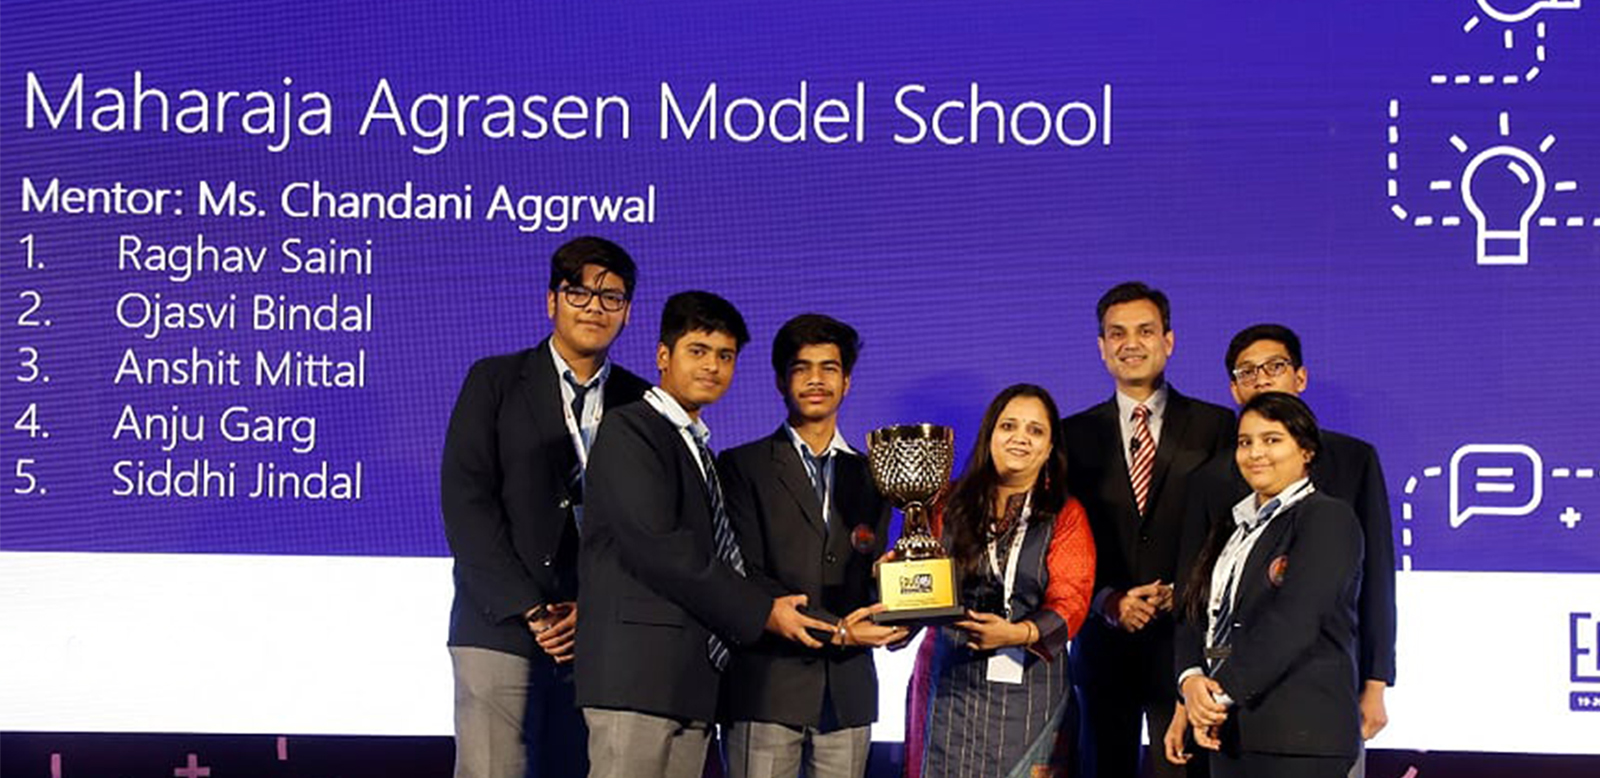 Minecraft Challenge Winners- Maharaja Agrasen Model School Project Name- AGRI SMART - Automated & Connected Agriculture Mentor Name- Ms. Chandani Aggrwal